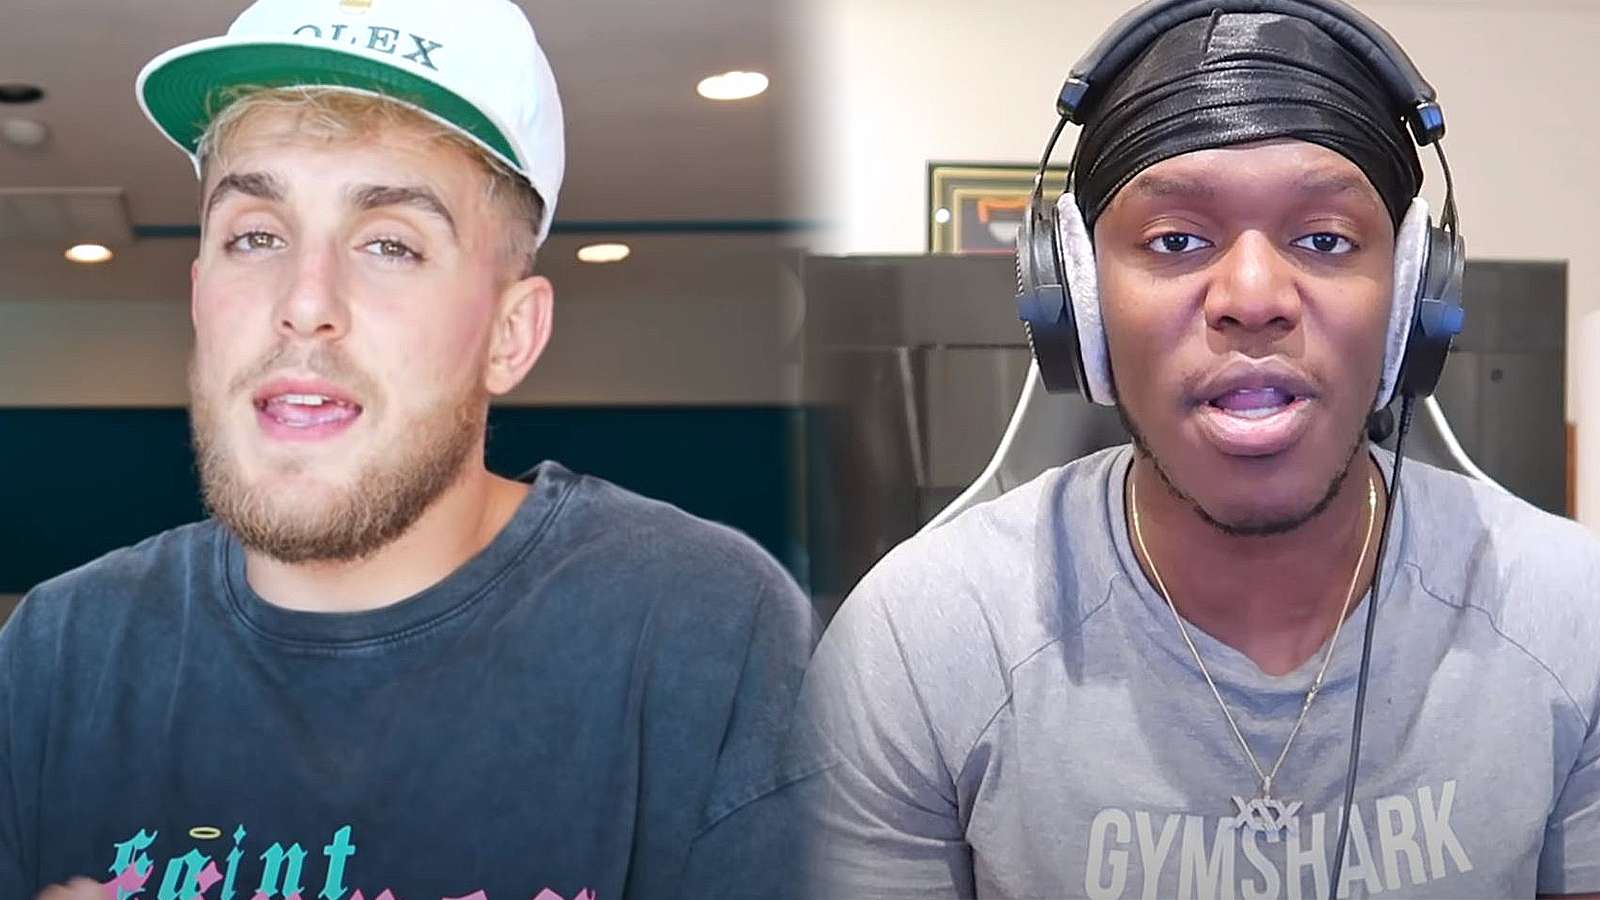 Jake Paul and KSI talk to the camera during videos.